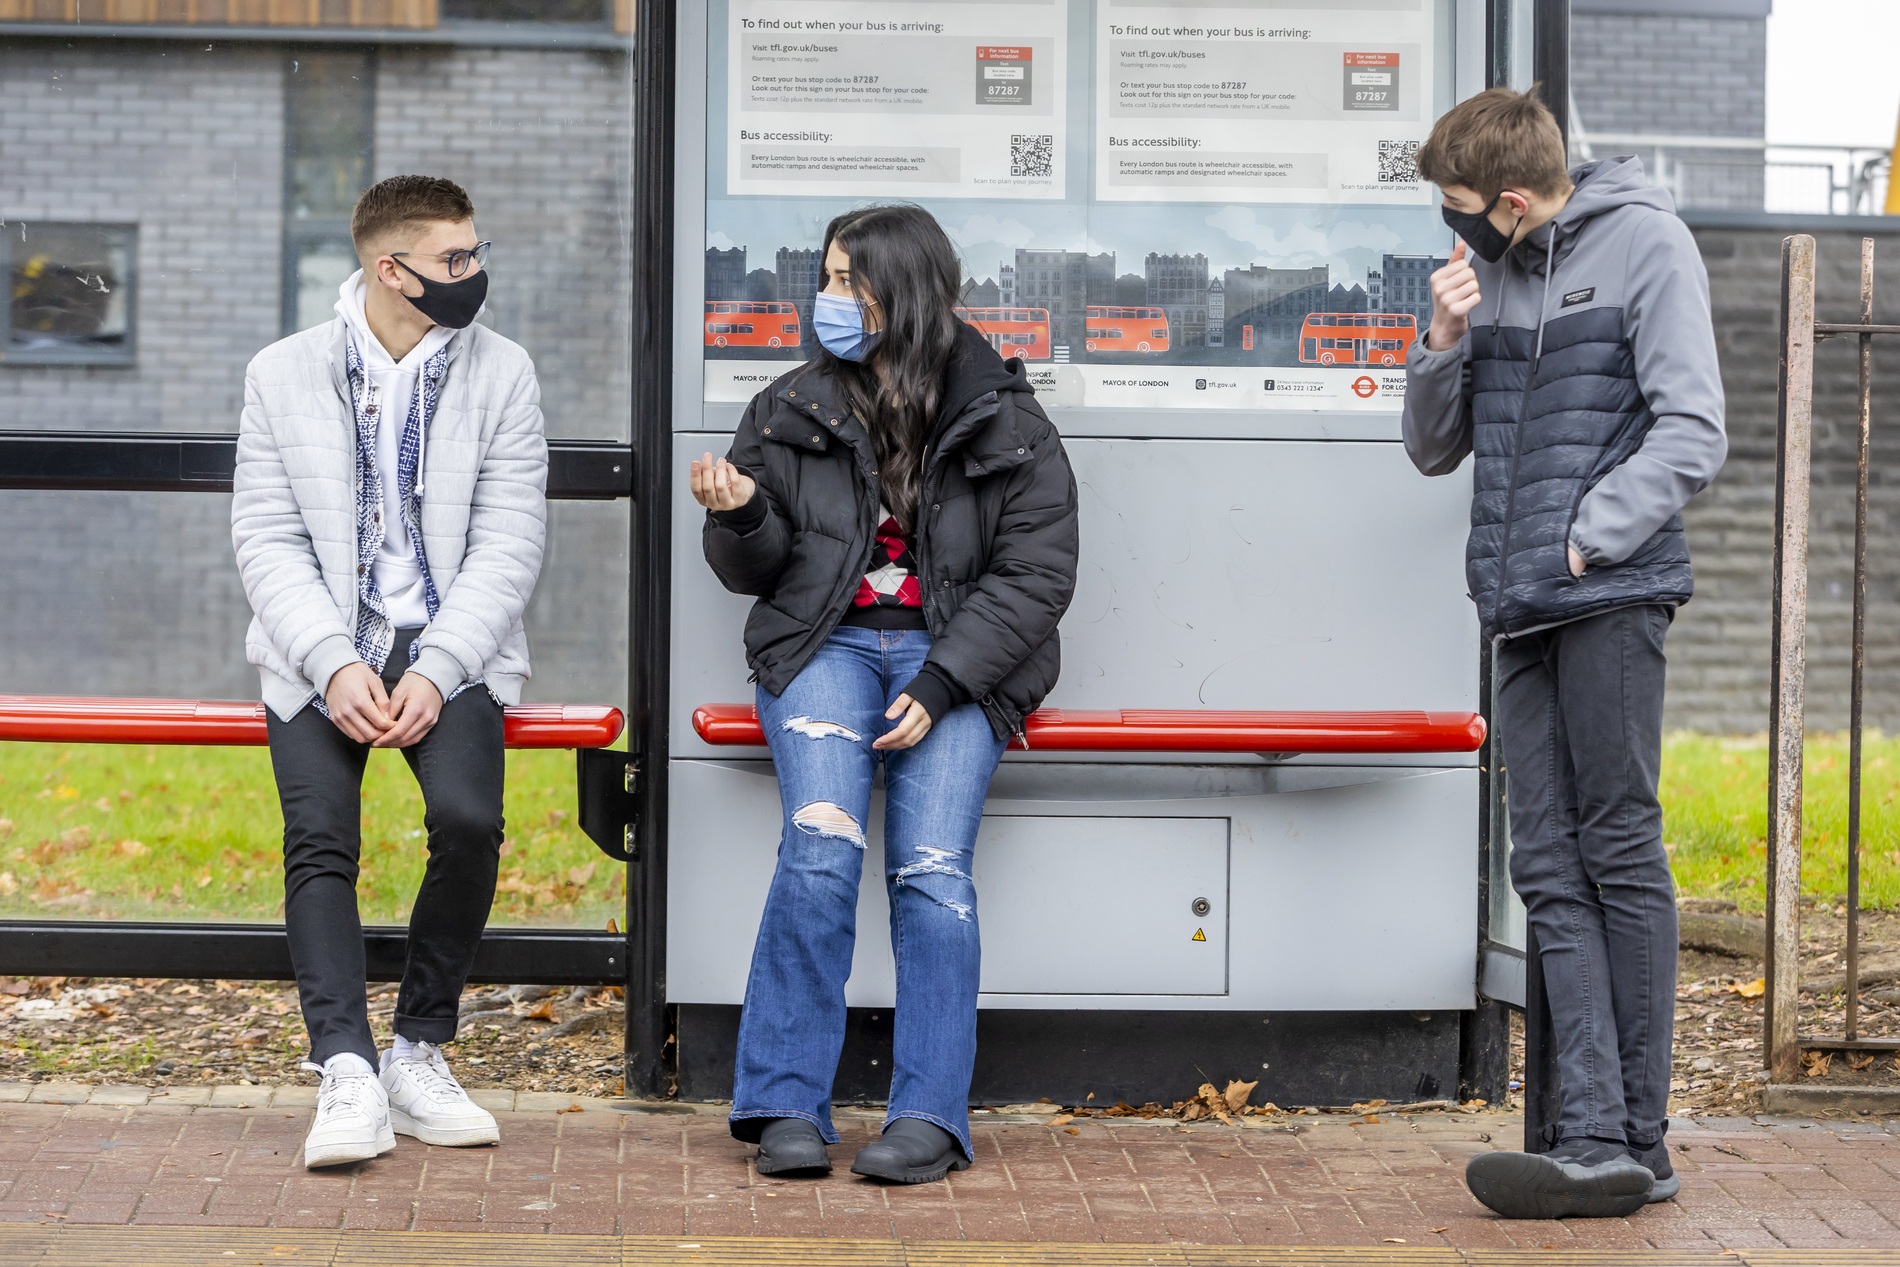 Three young people are waiting for a bus. They are considering volunteering. This is a full-body image.